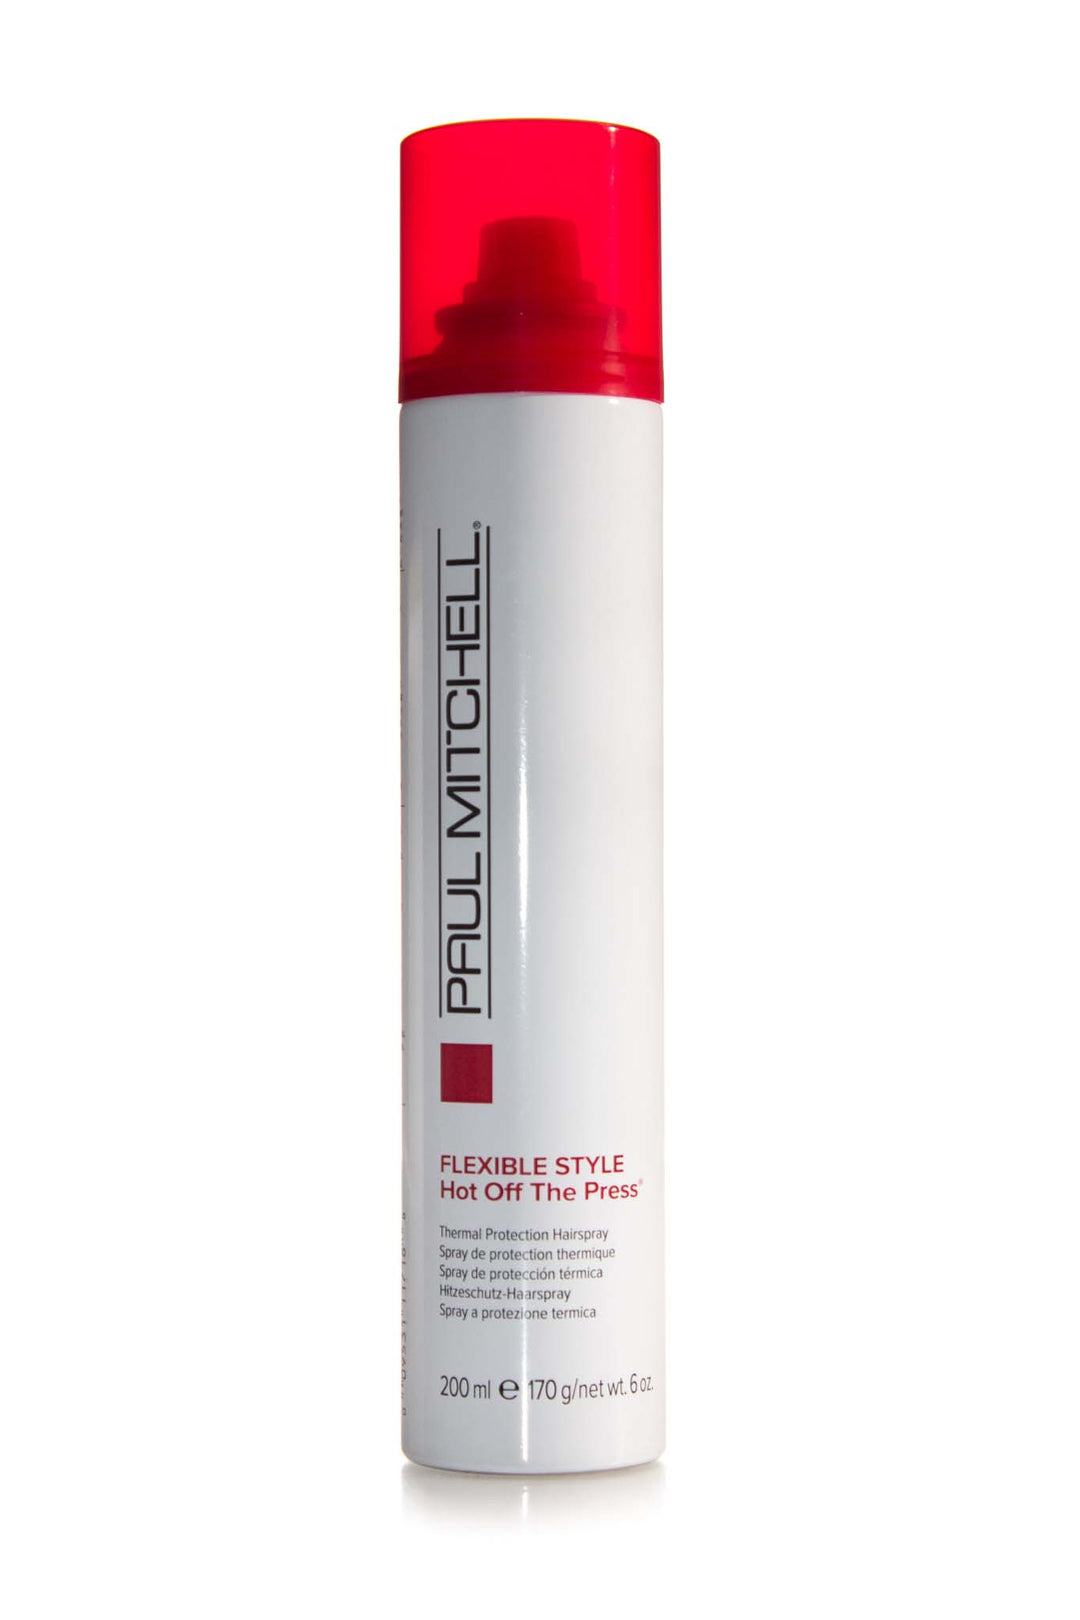 paul-mitchell-flexible-style-hot-off-the-press-200ml